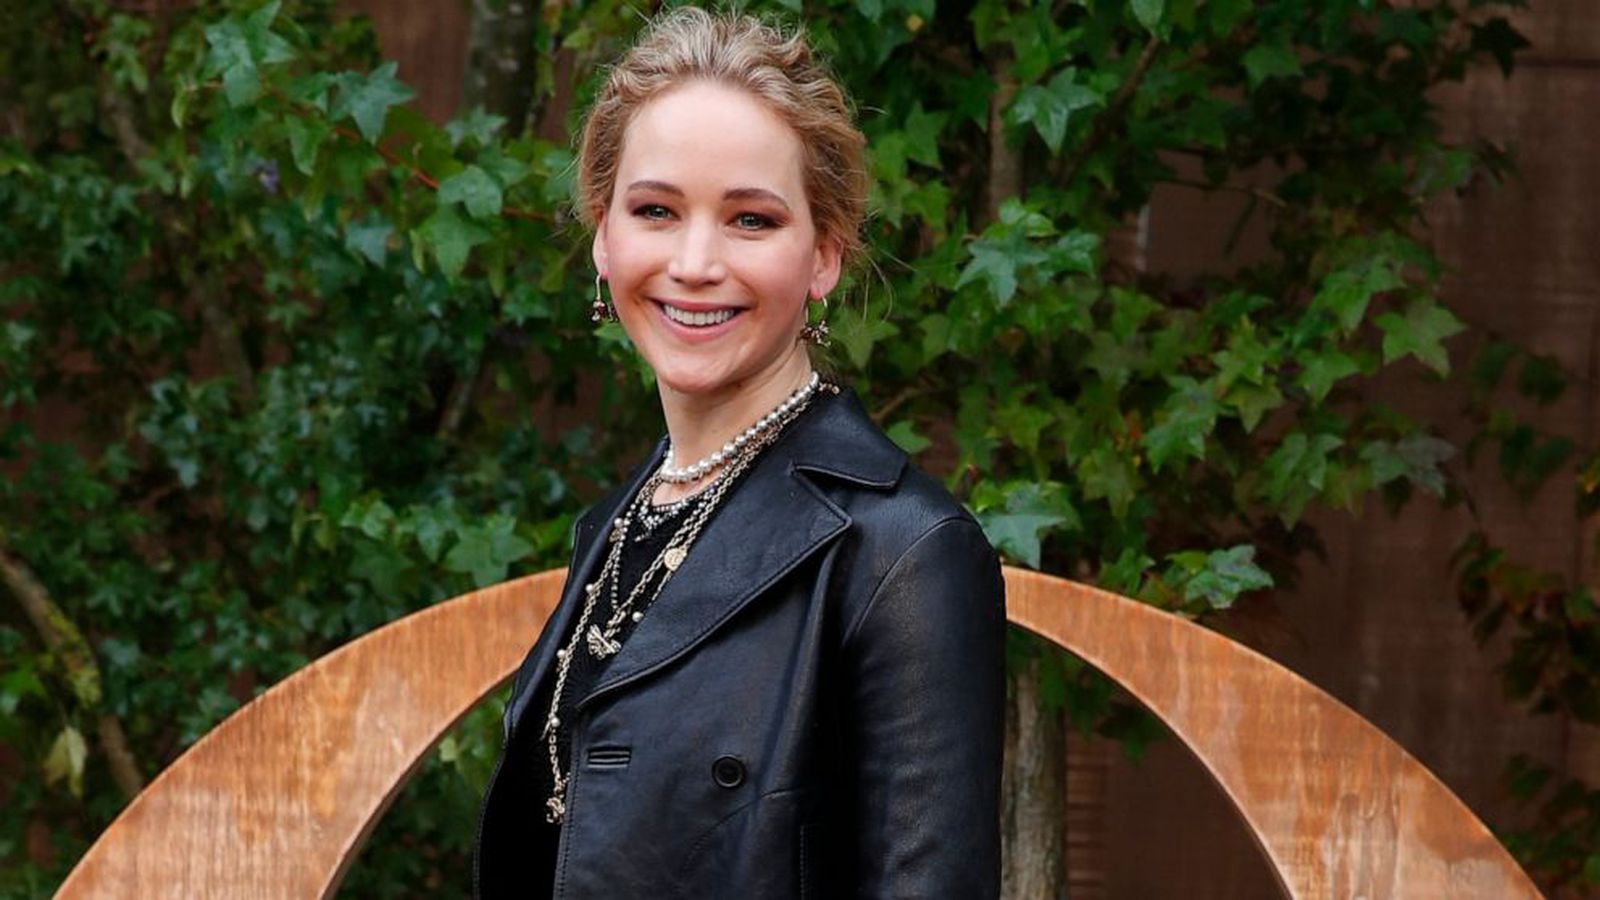 Apple Reportedly Bidding on Film Starring Jennifer Lawrence as Hollywood Agent